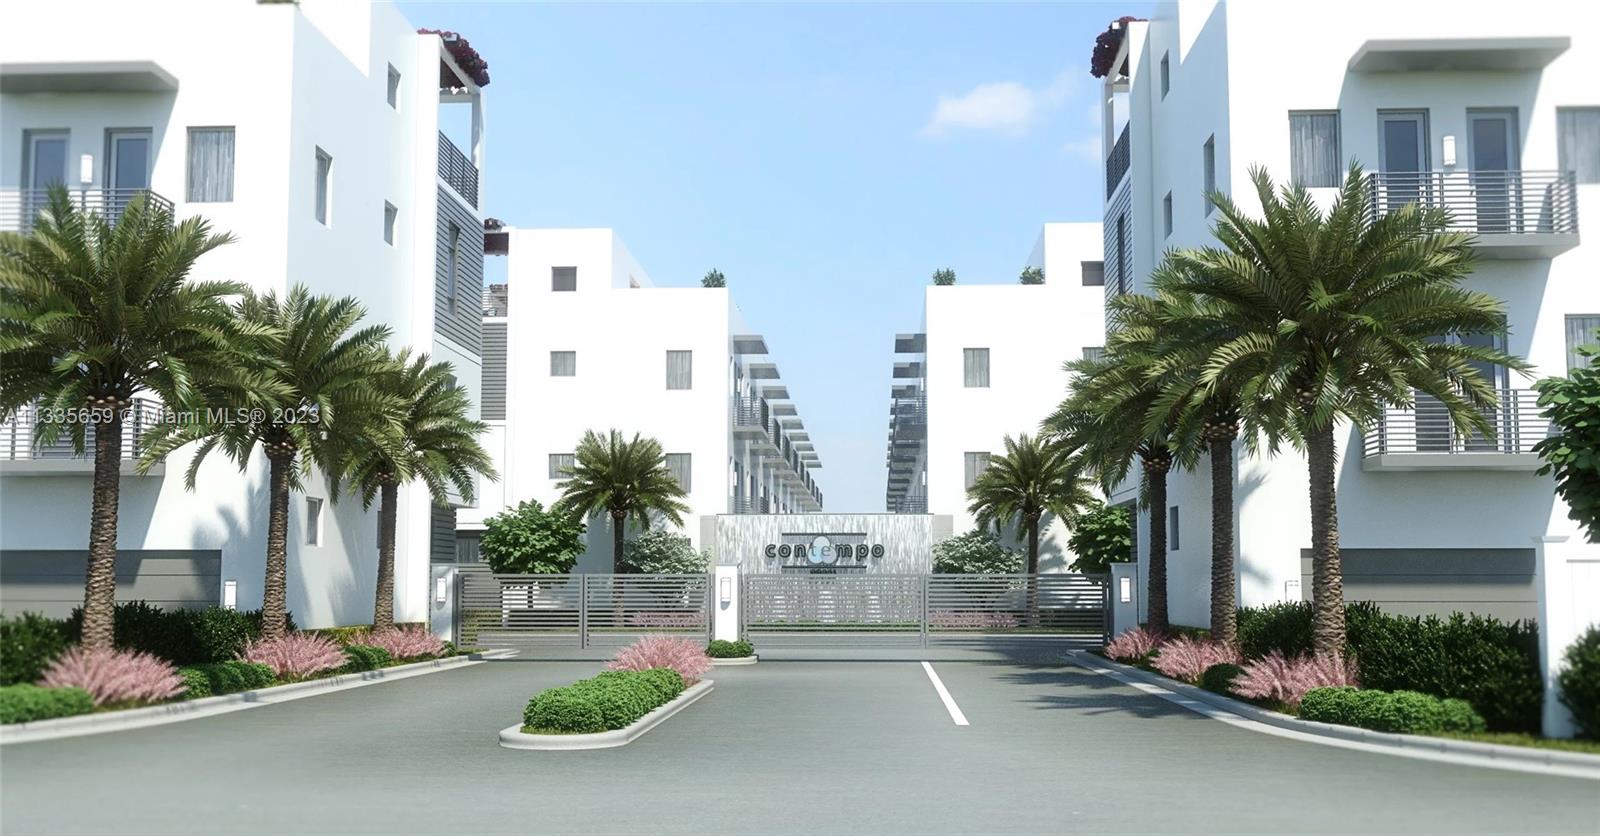 Spectacular and luxurious Townhouse, with prime location, porcelain and wood floors. Luxury and contemporary details. Terrace with yacuzzi, with IVY roof and lights. Two cars roofed garage, and two additional spaces, one in front of the garage and one in the community. Entrance in front of the new Doral Water Park currently under construction.